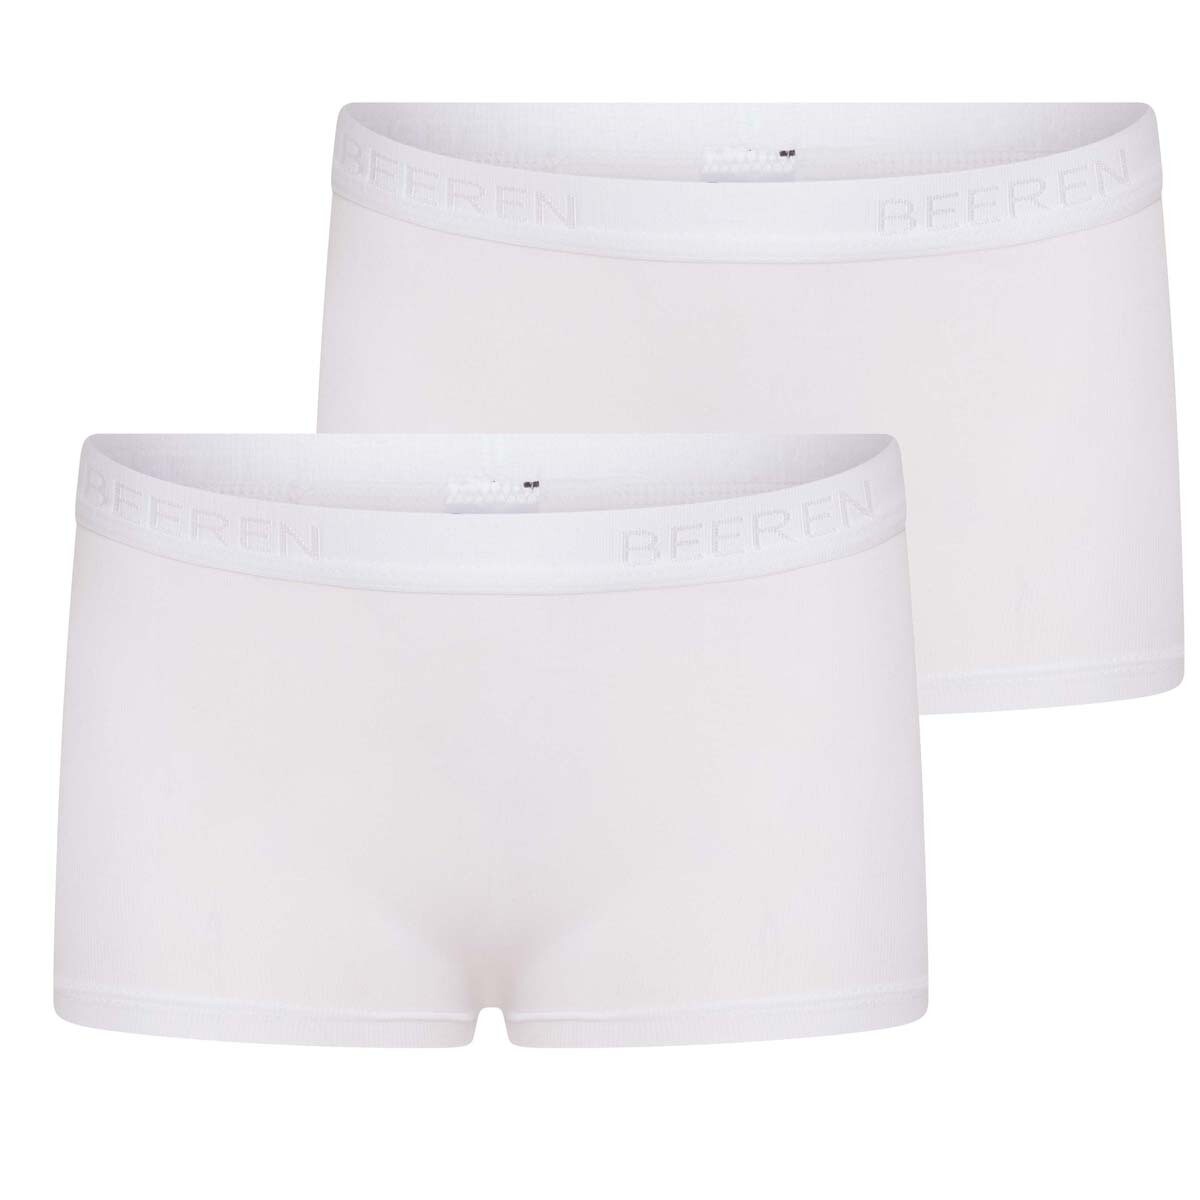 (21-453) Meisjes boxer 2-pack Young wit 152/164